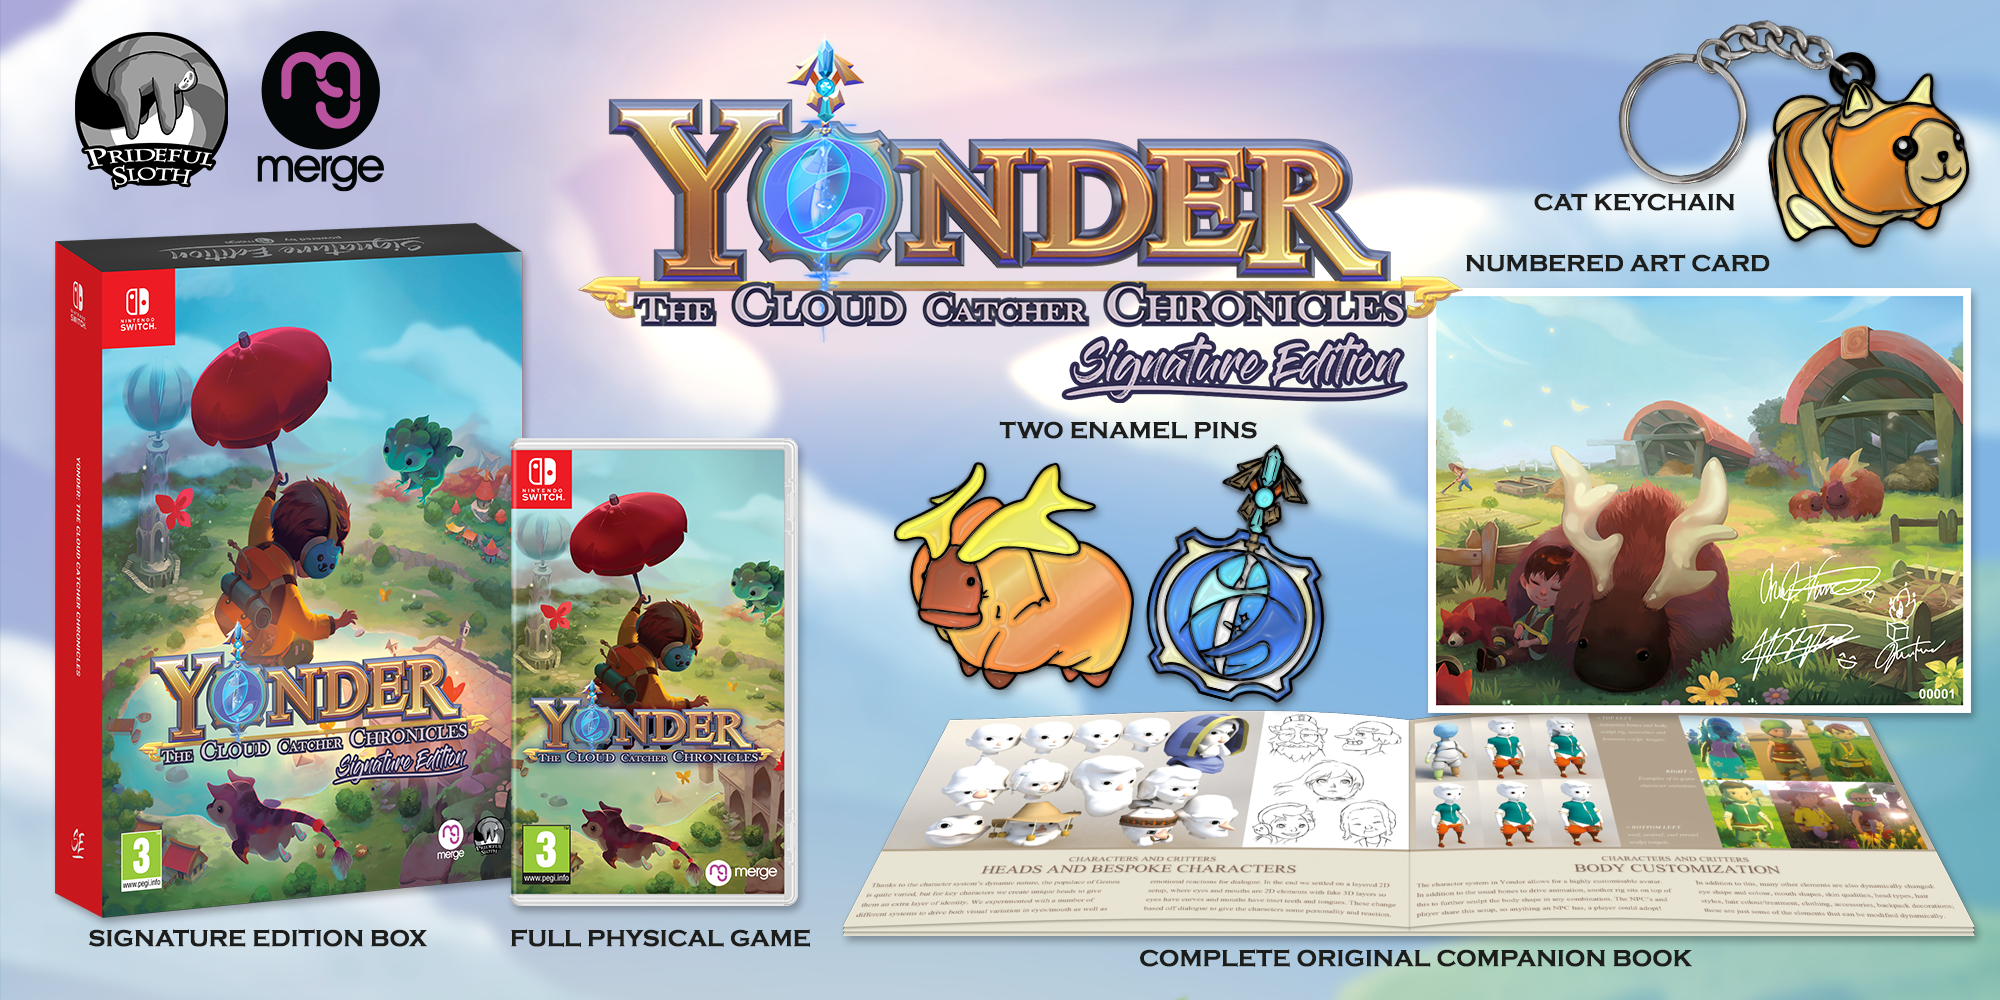 Yonder: The Cloud Catcher Chronicles - New Signature Edition (Switch) –  Signature Edition Games